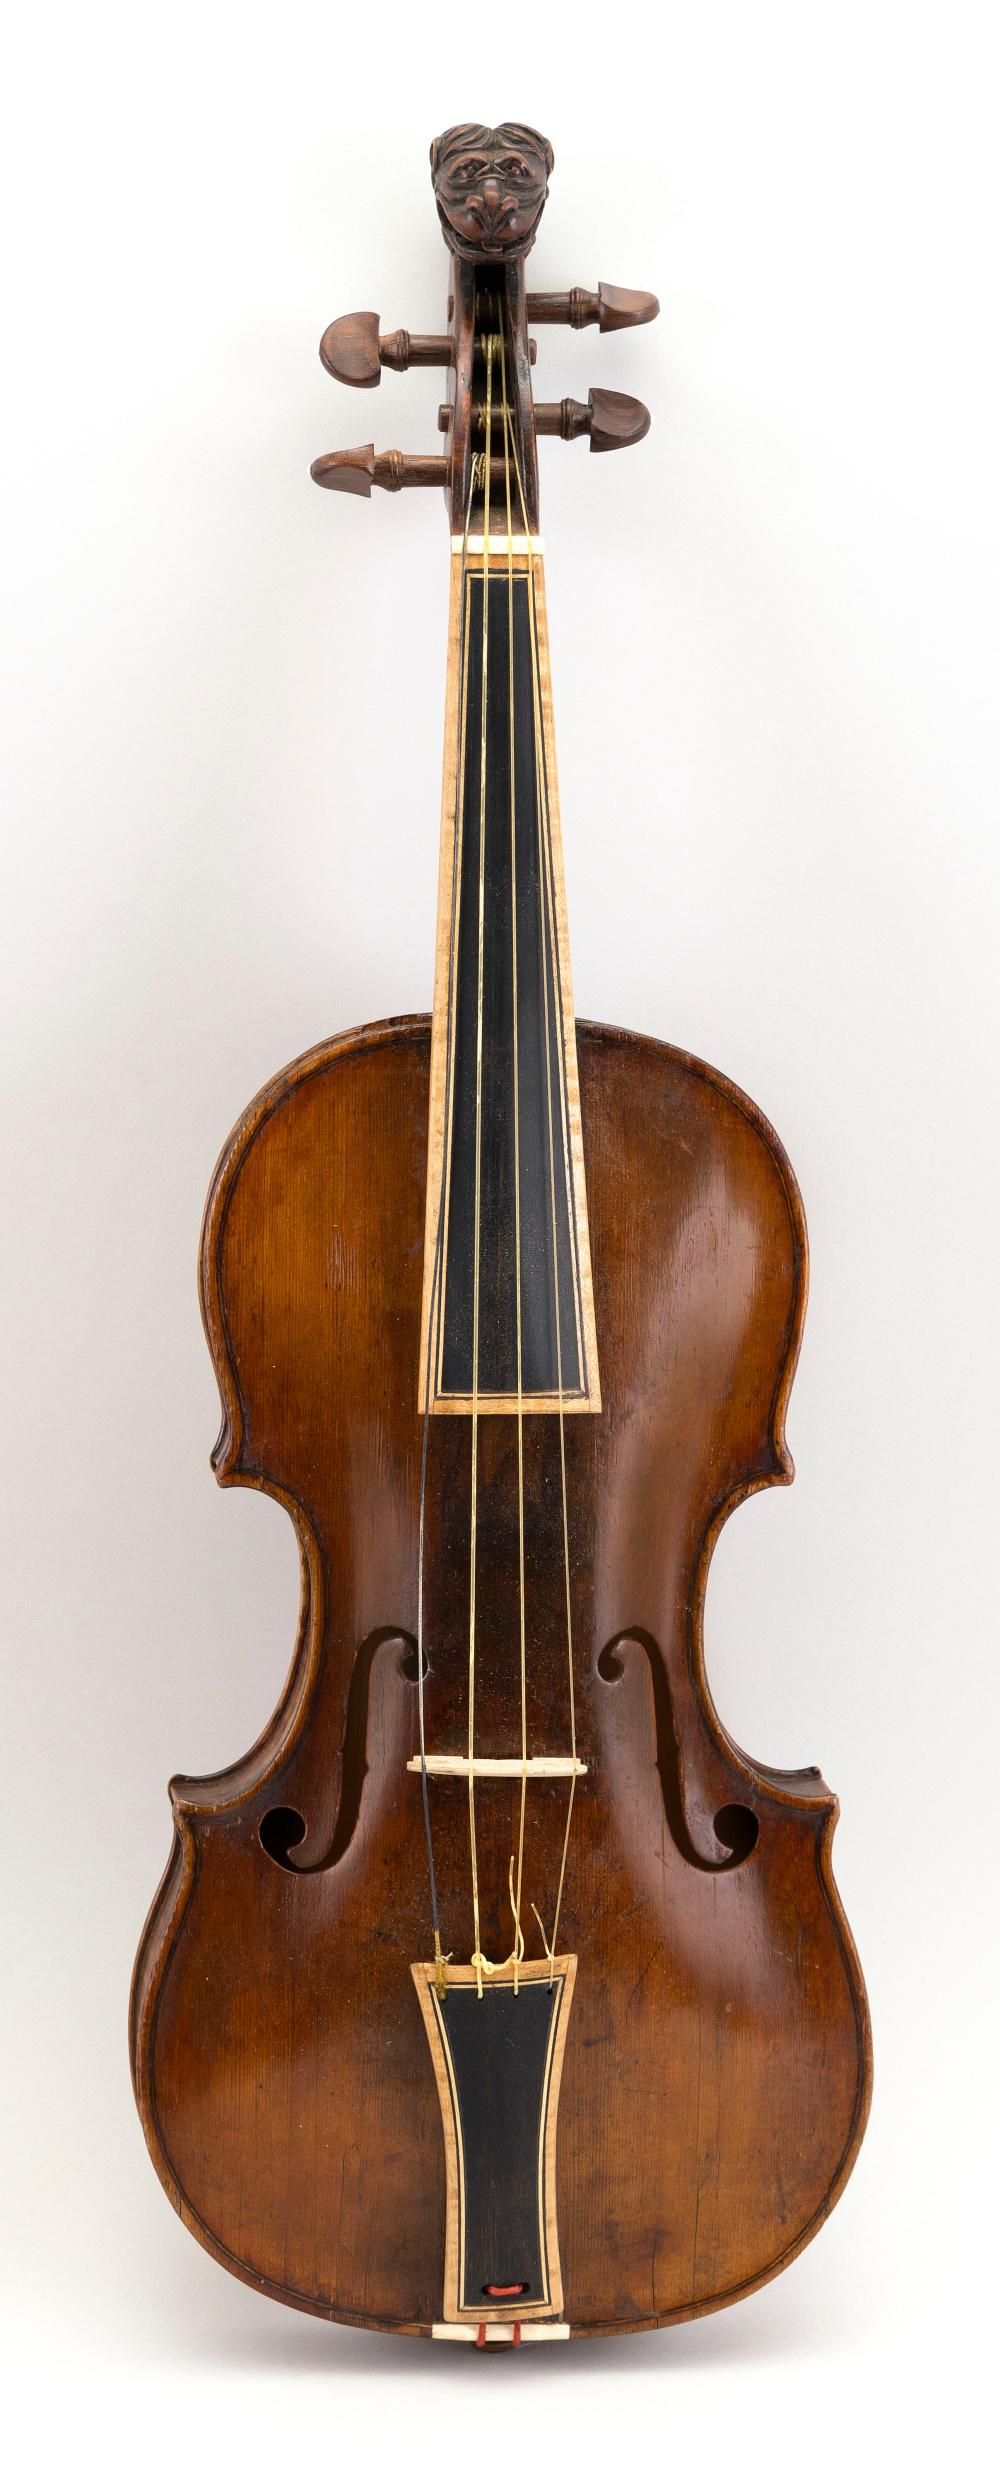 TYROLEAN BAROQUE STYLE VIOLIN LENGTH 34d020